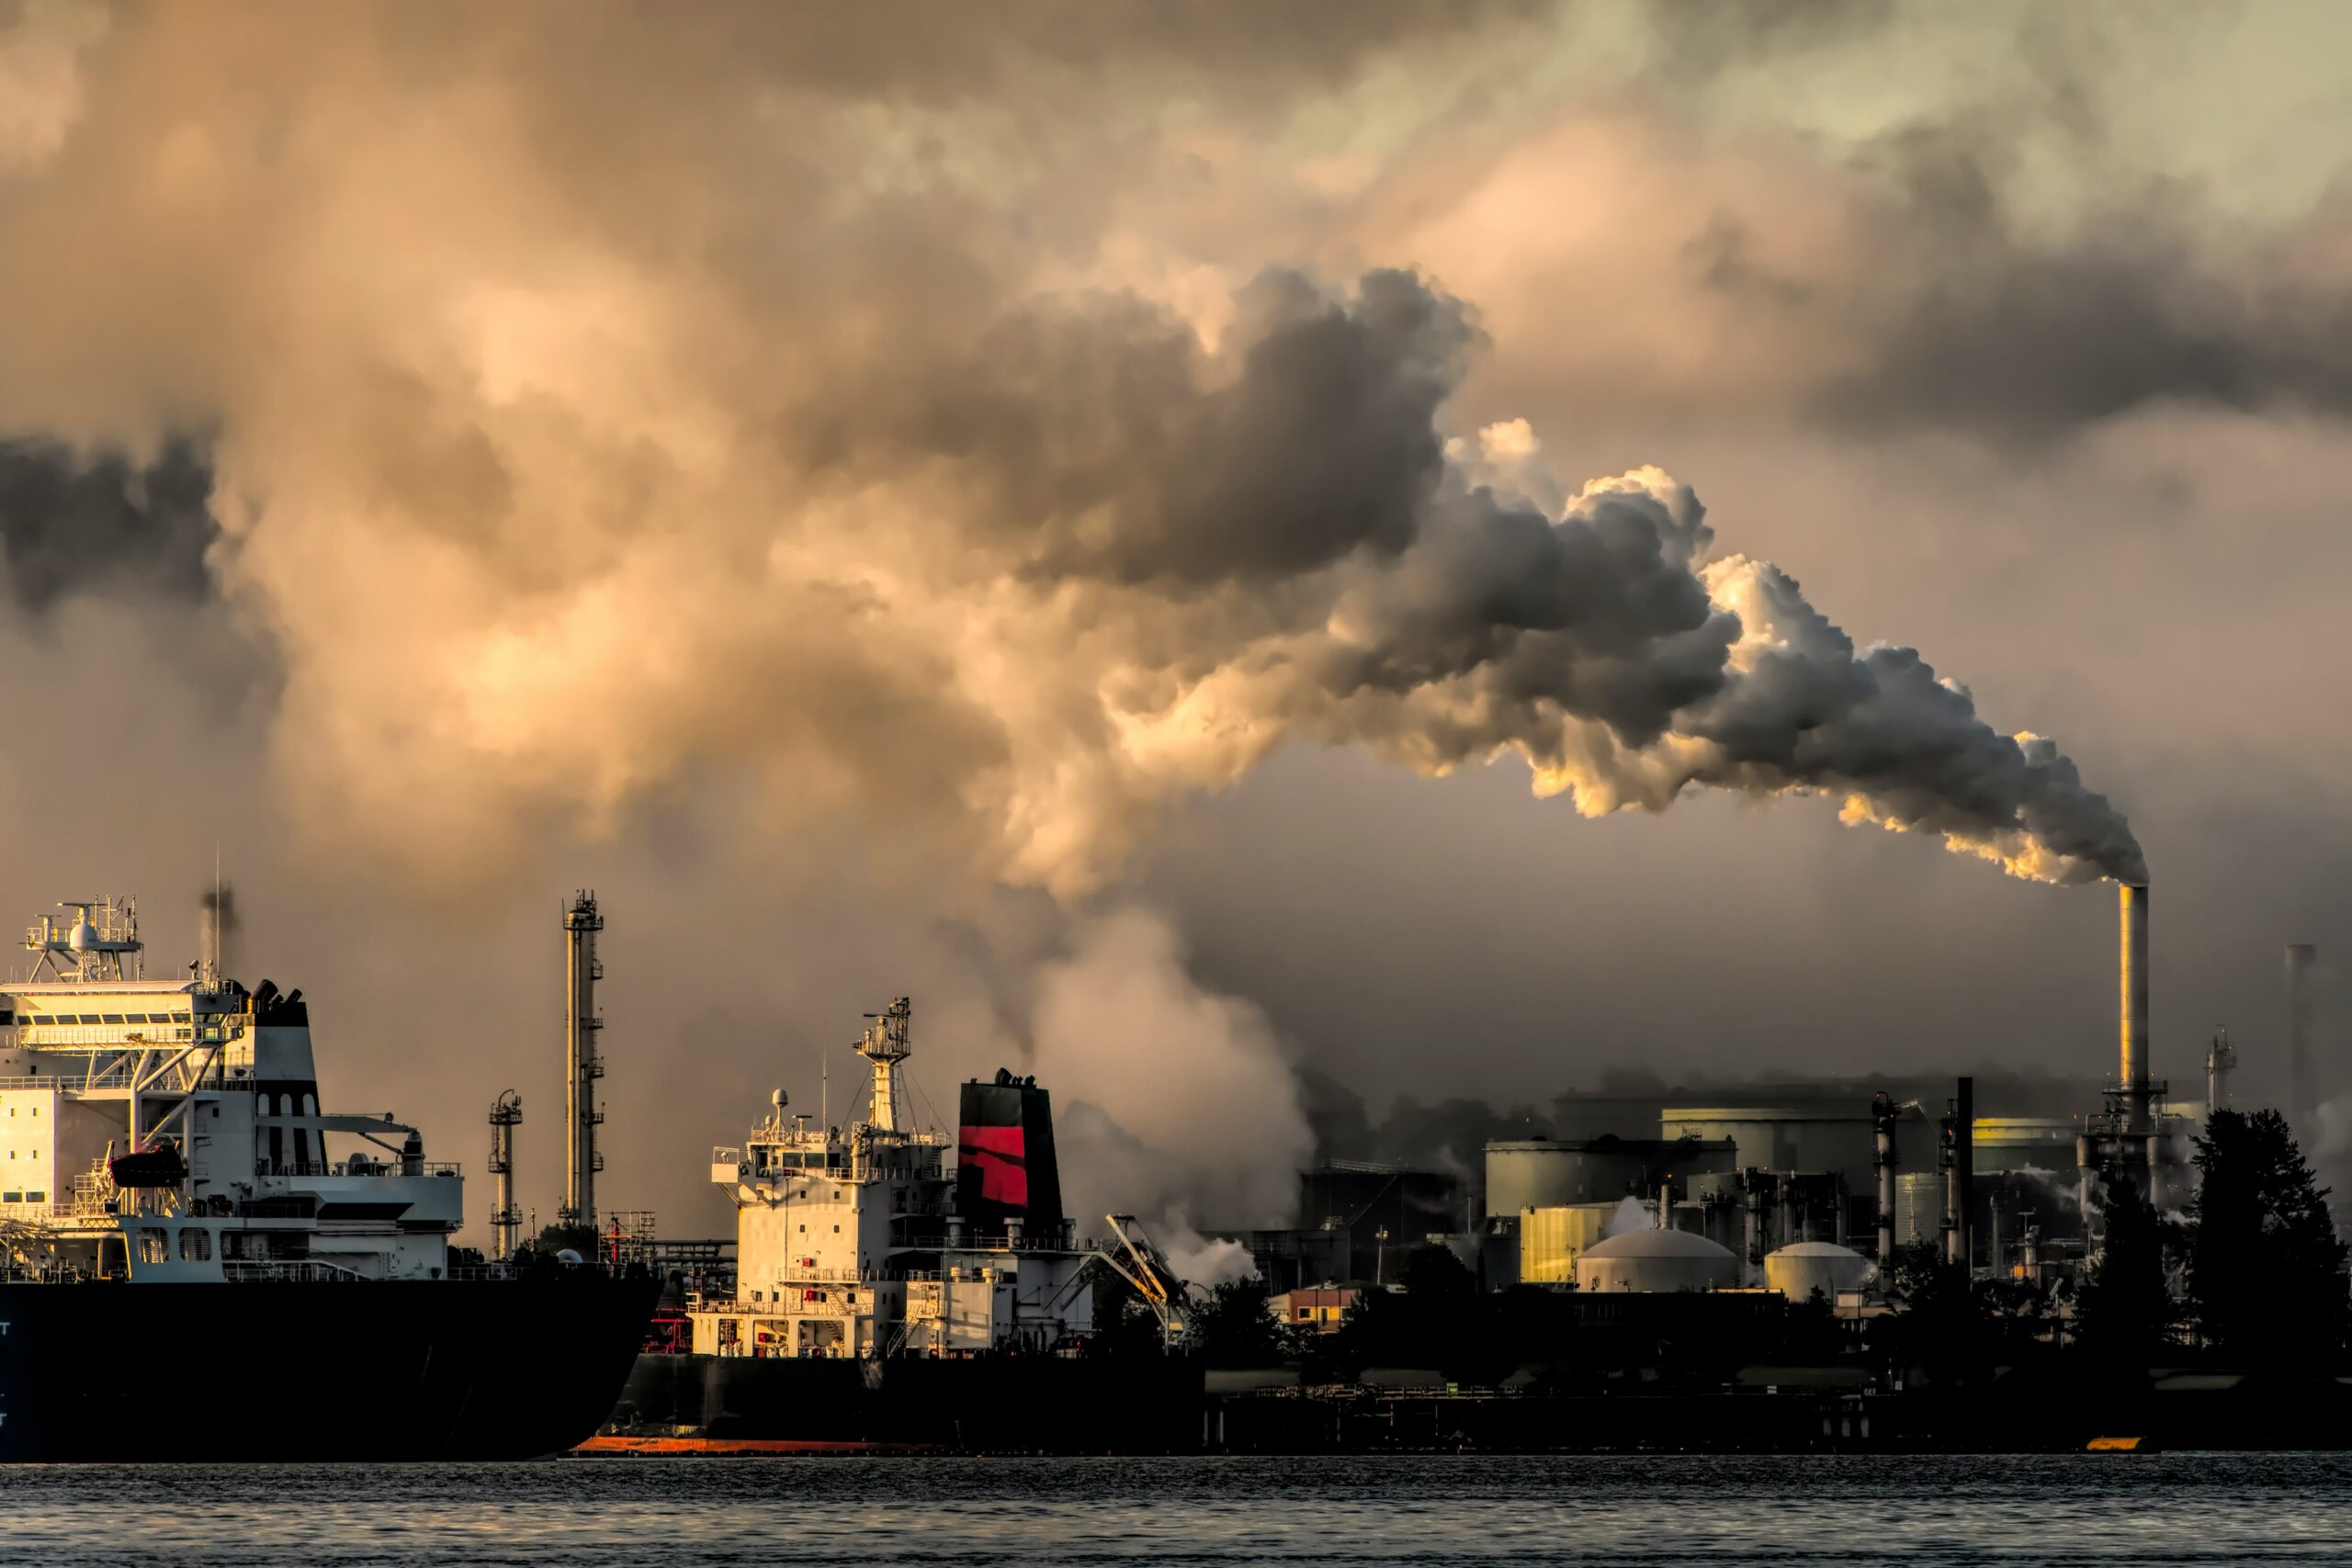 Image of coastal oil refinery with smoke coming out of a chimney, meant to illustrate pollution caused from fossil fuel industry.